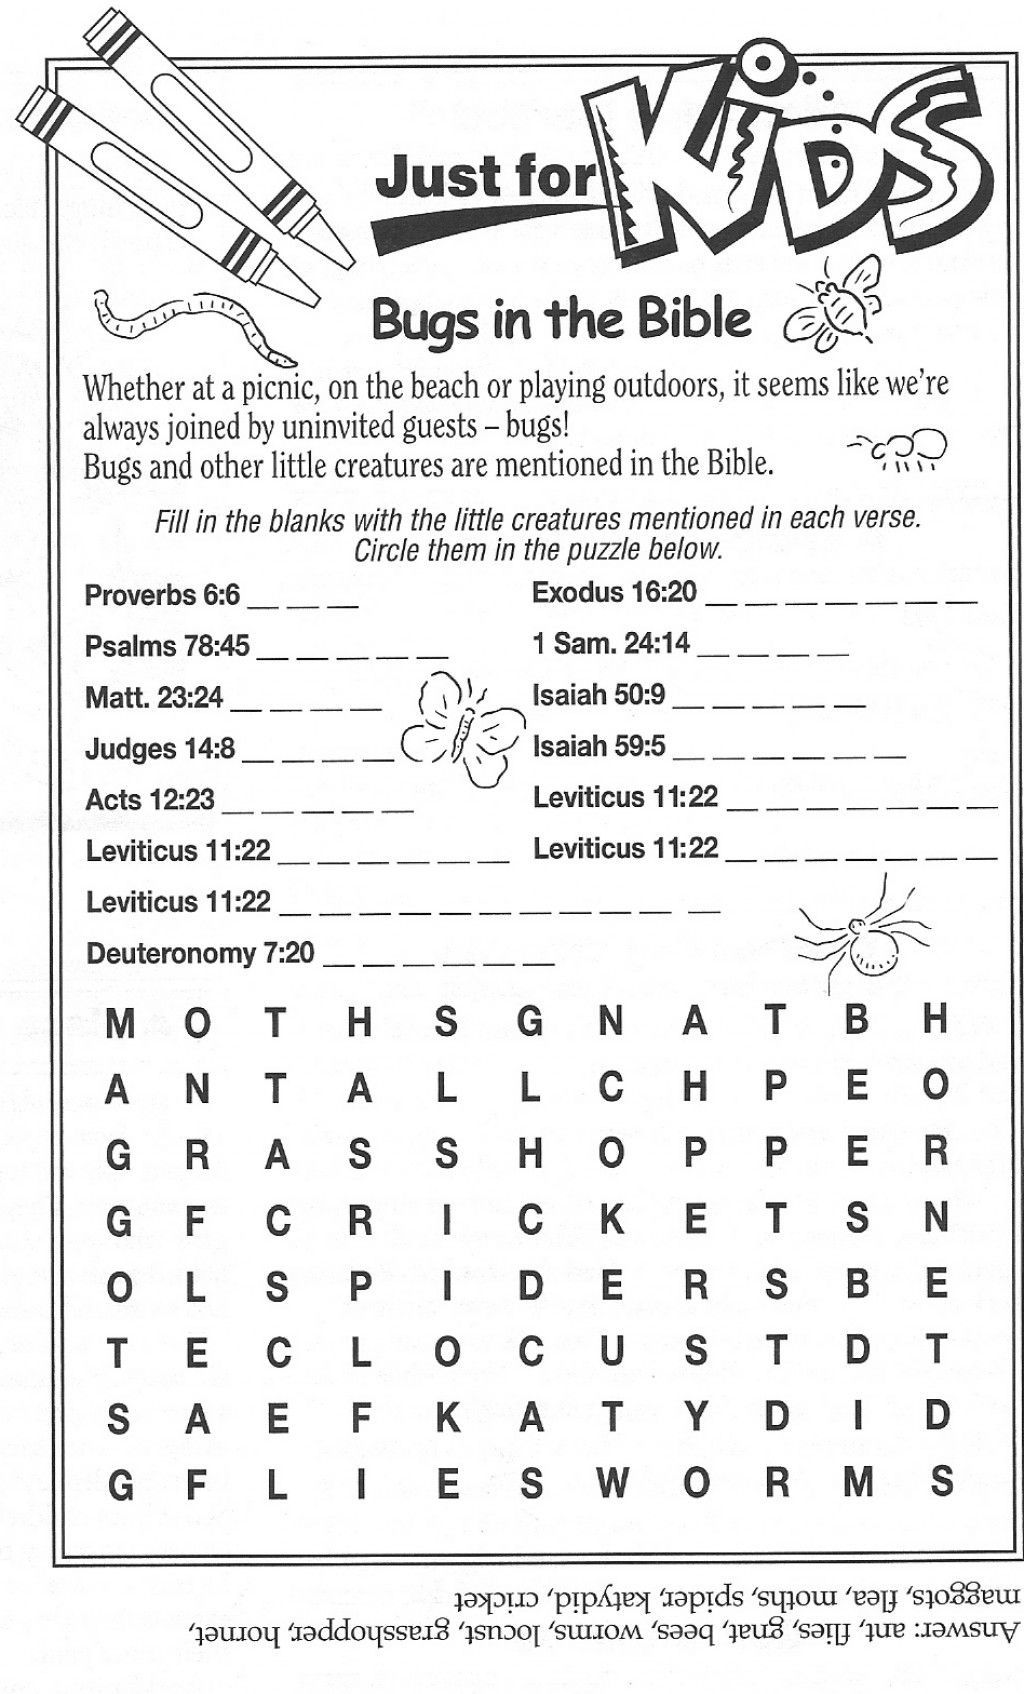 Online Bible Word Search Printable Pages | Religion | Bible For Kids - Free Printable Bible Games For Youth